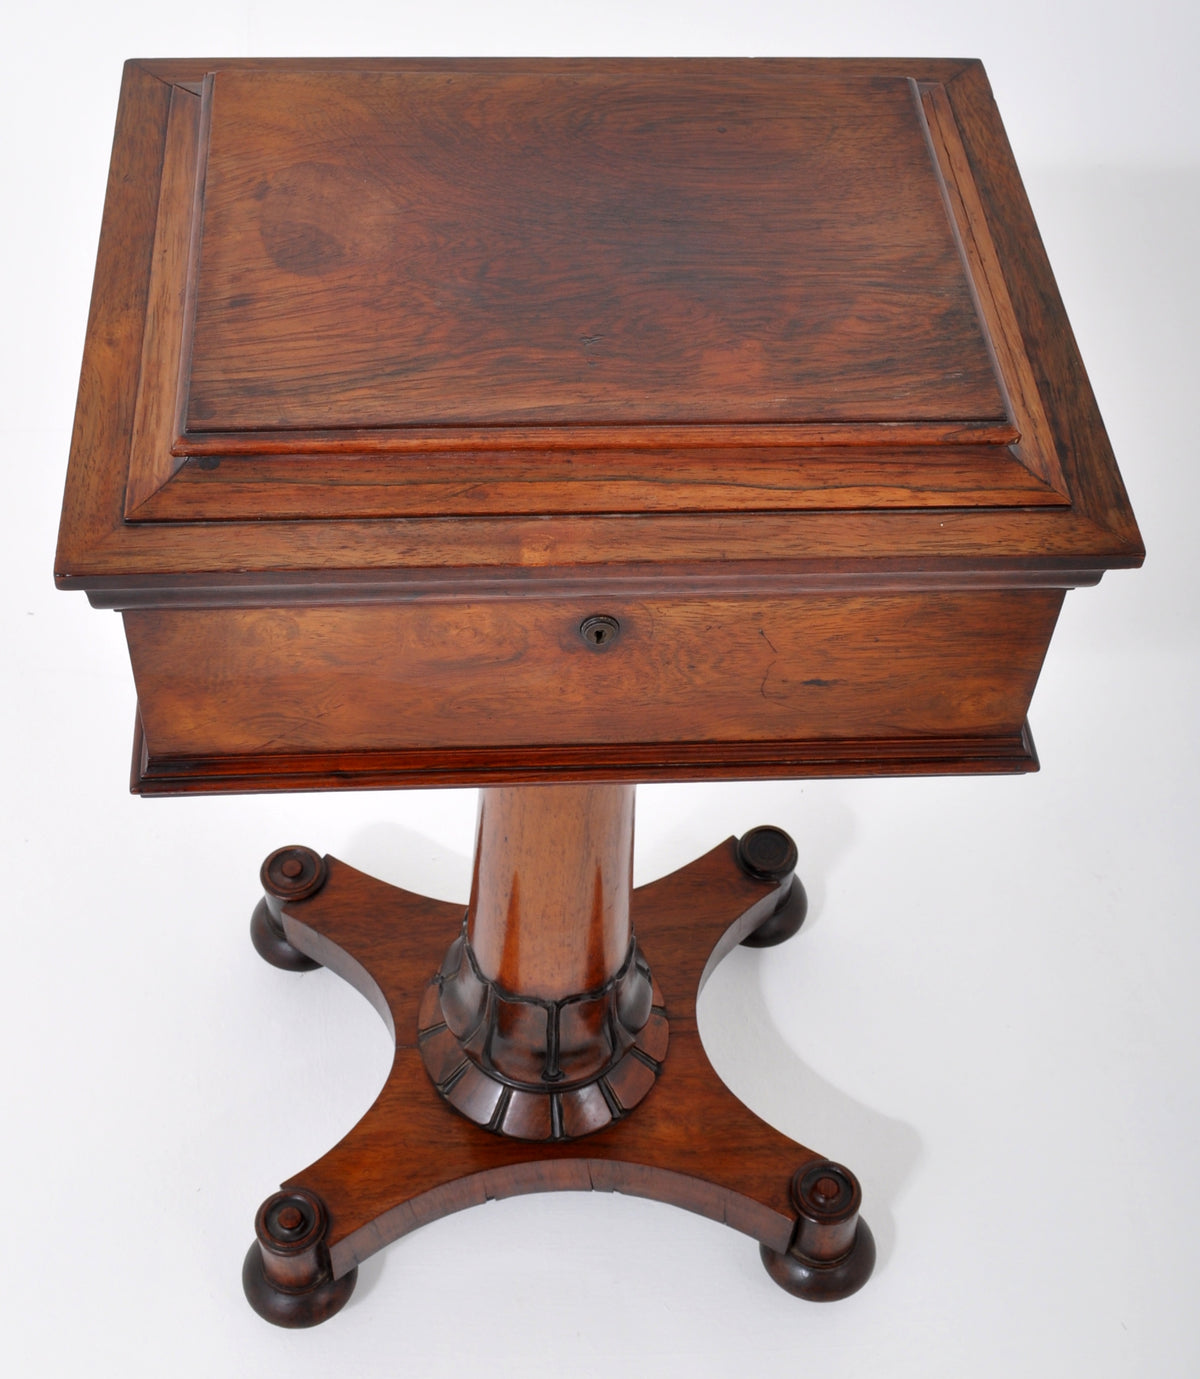 Antique English Regency Rosewood Teapoy/Table, Circa 1825